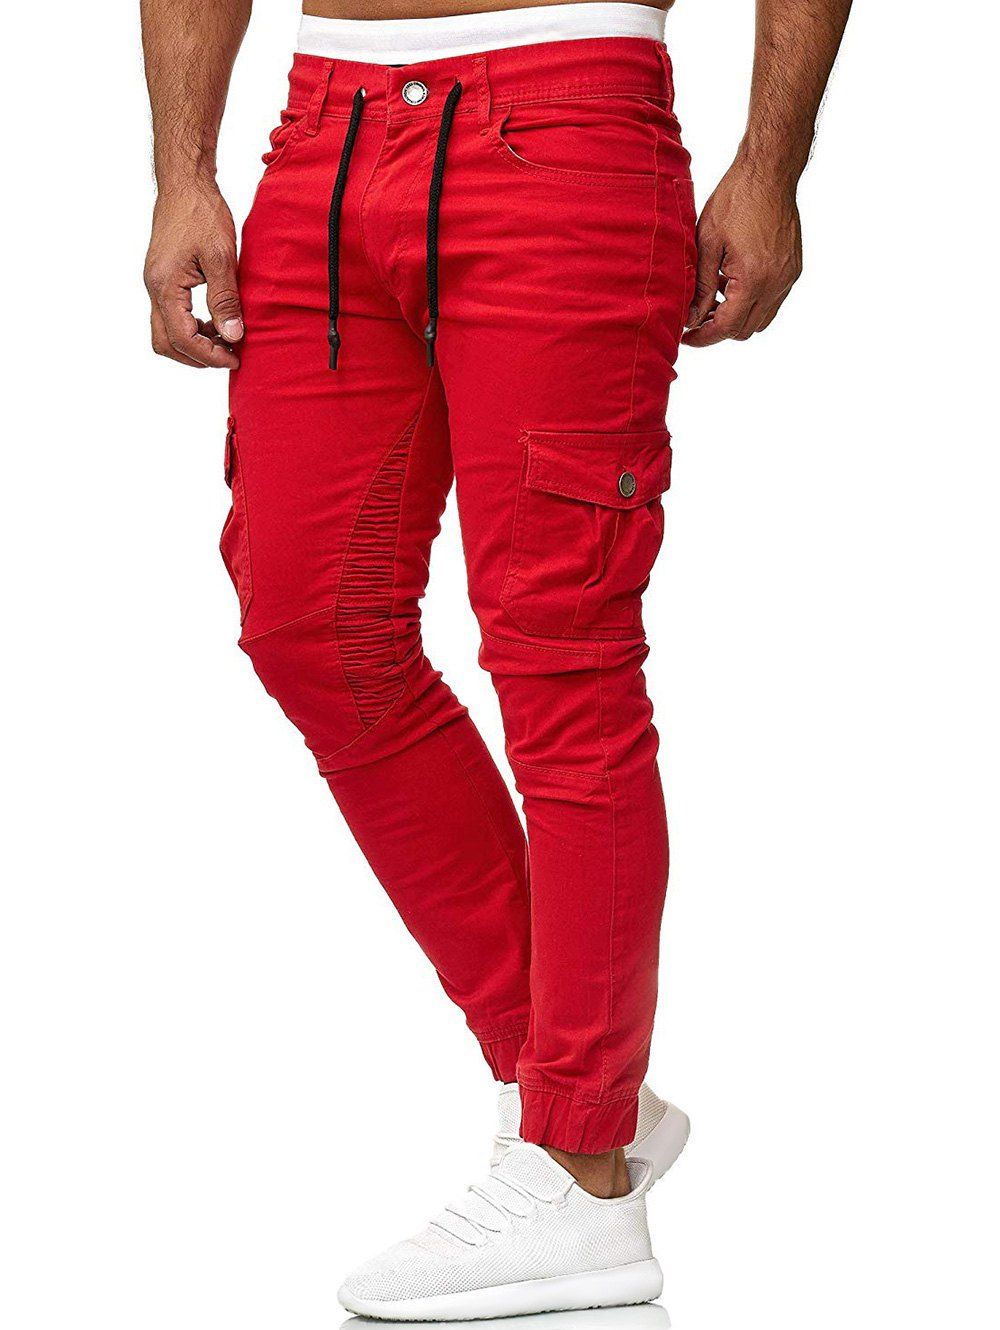 [38% OFF] 2020 Pleated Trim Drawstring Cargo Jogger Pants In RED ...